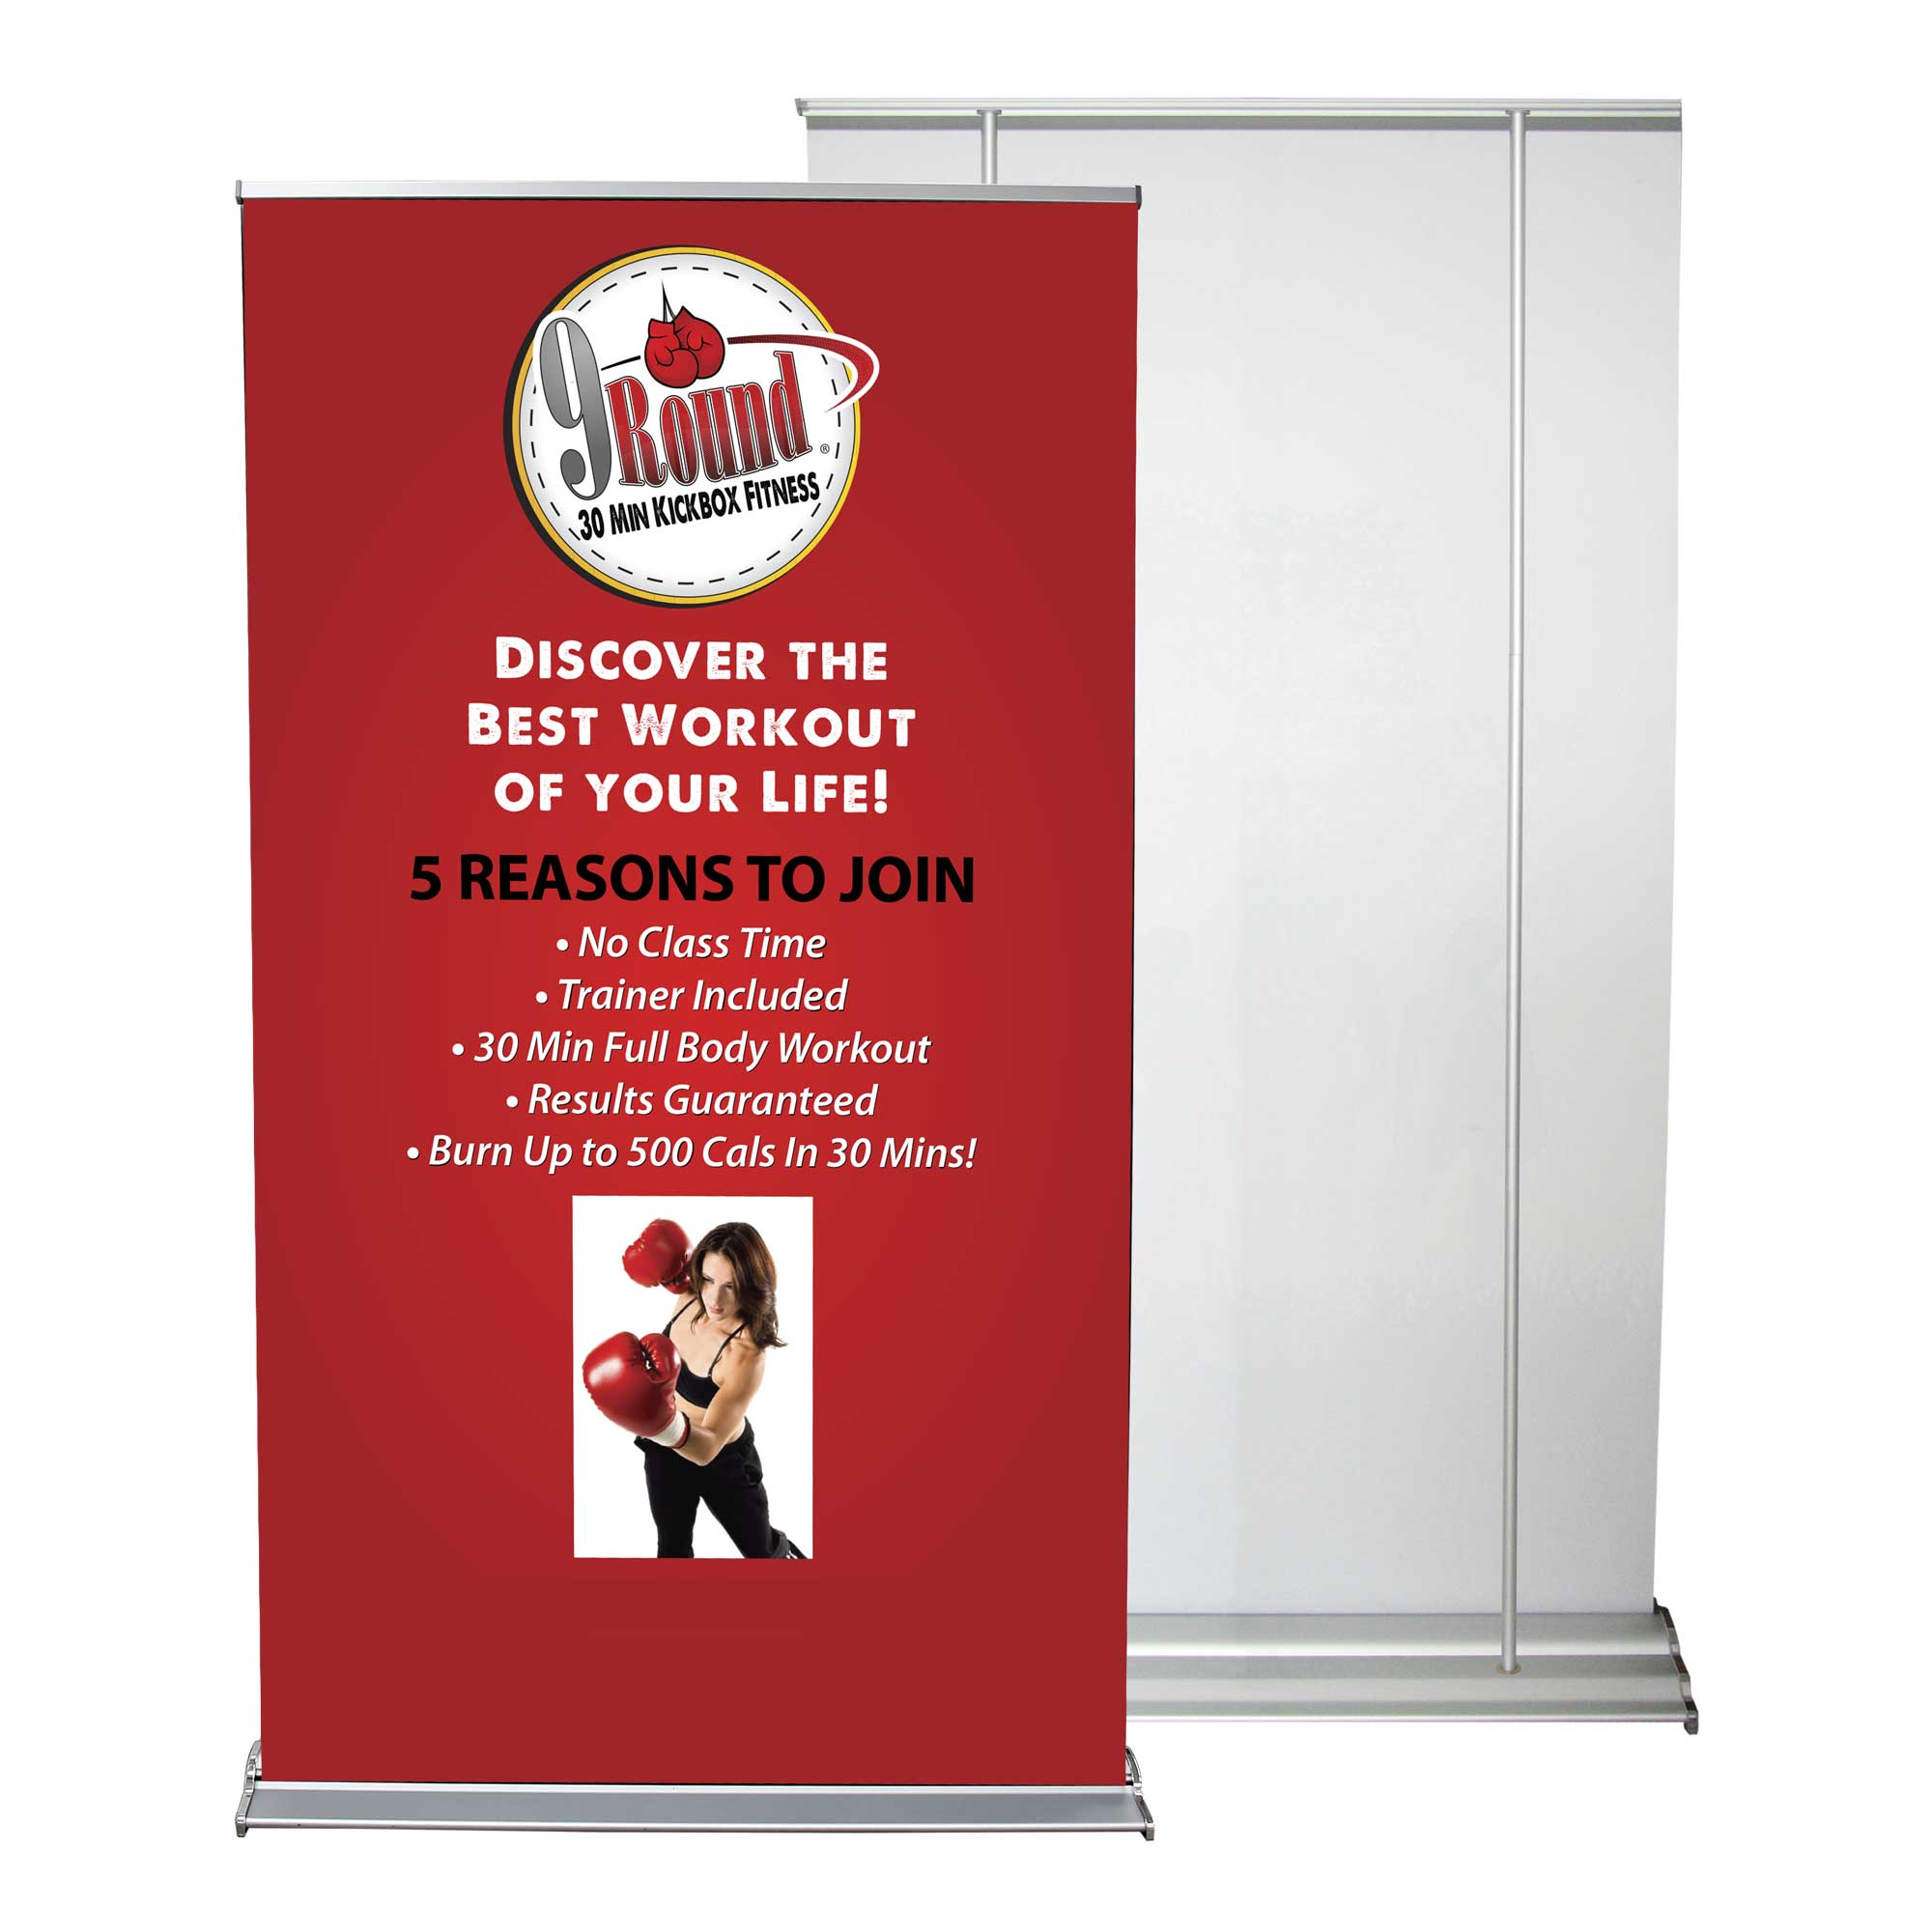 High Quality Roll-up Stand Banner Printing at Bali Print Shop